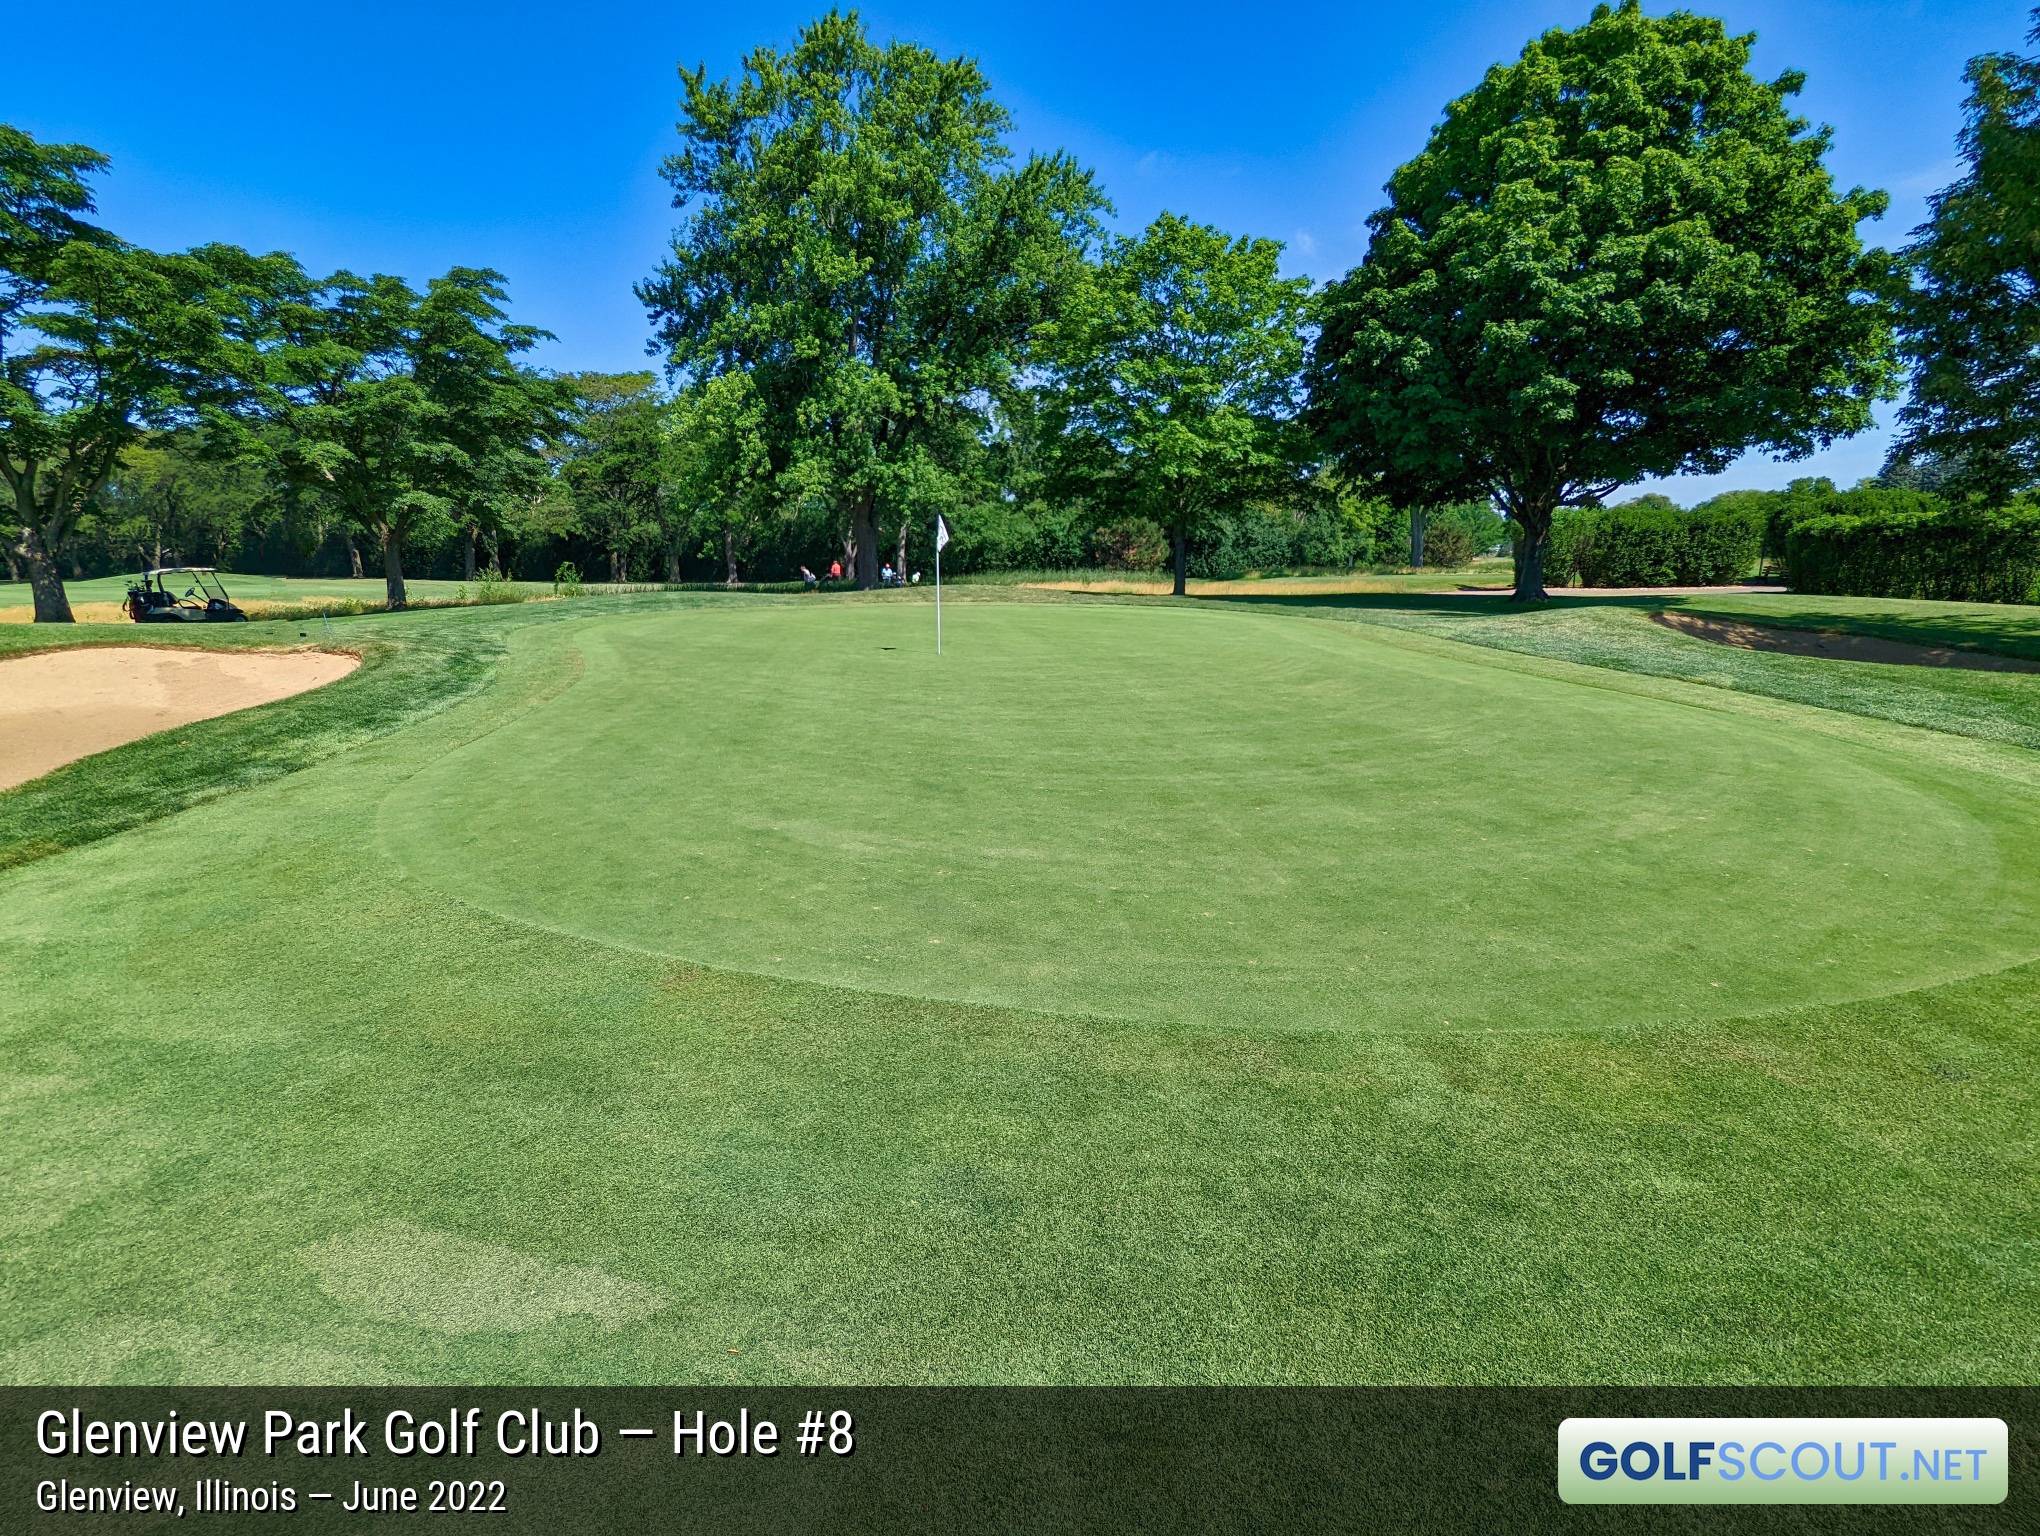 Photo of hole #8 at Glenview Park Golf Club in Glenview, Illinois. 